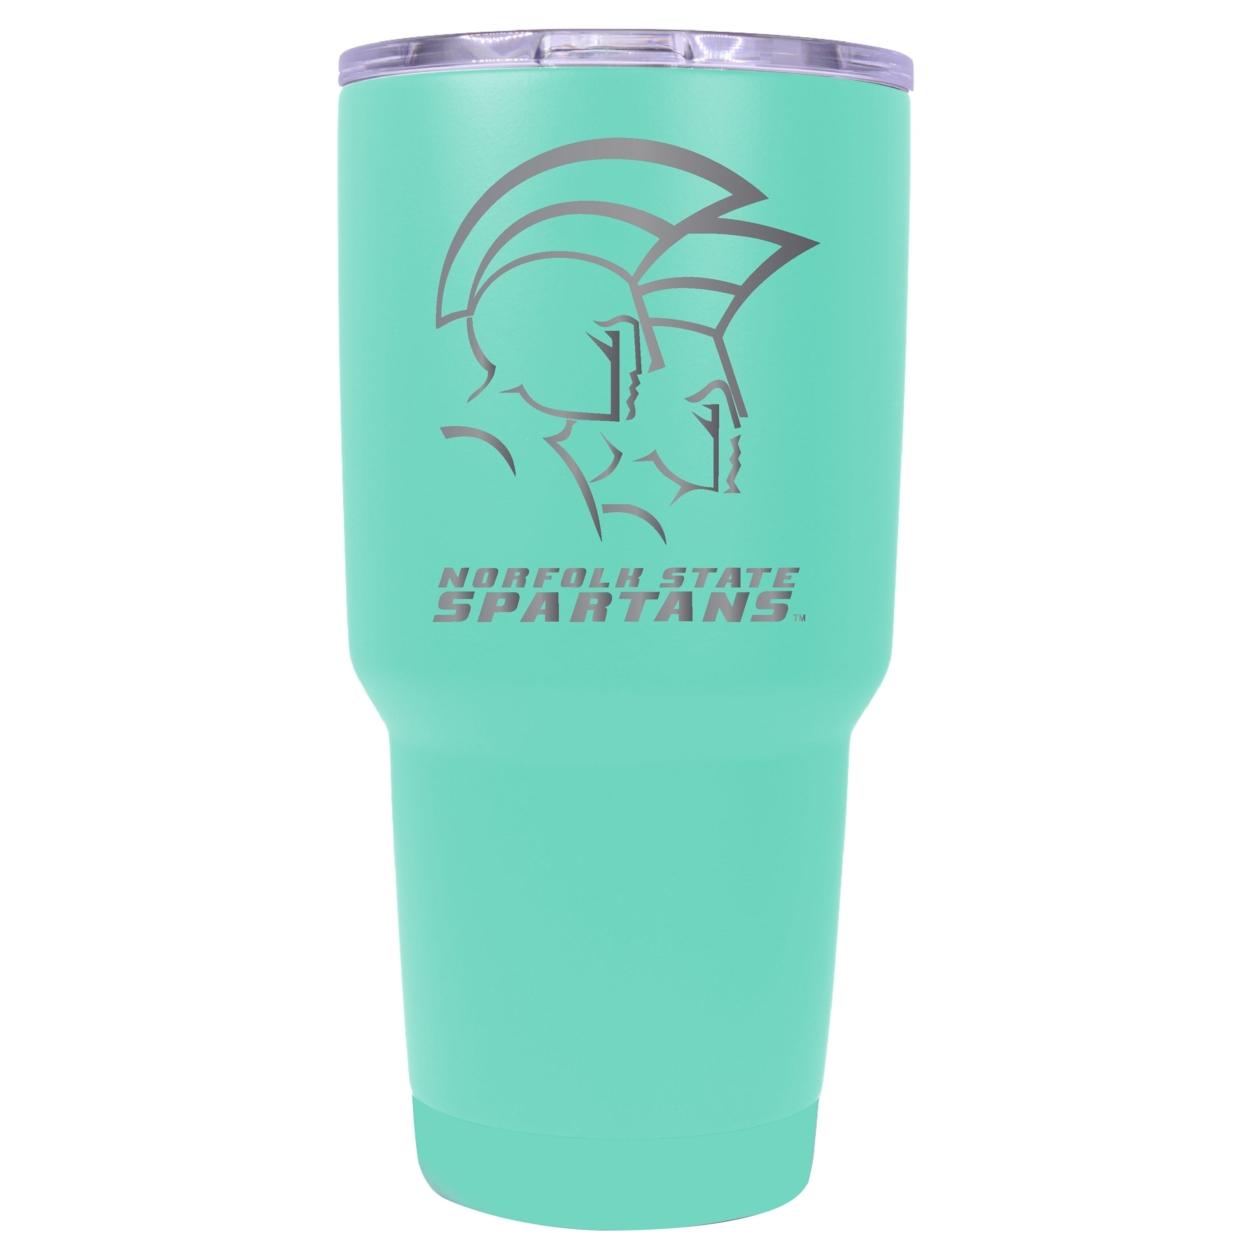 Norfolk State University 24 Oz Laser Engraved Stainless Steel Insulated Tumbler - Choose Your Color. - Seafoam